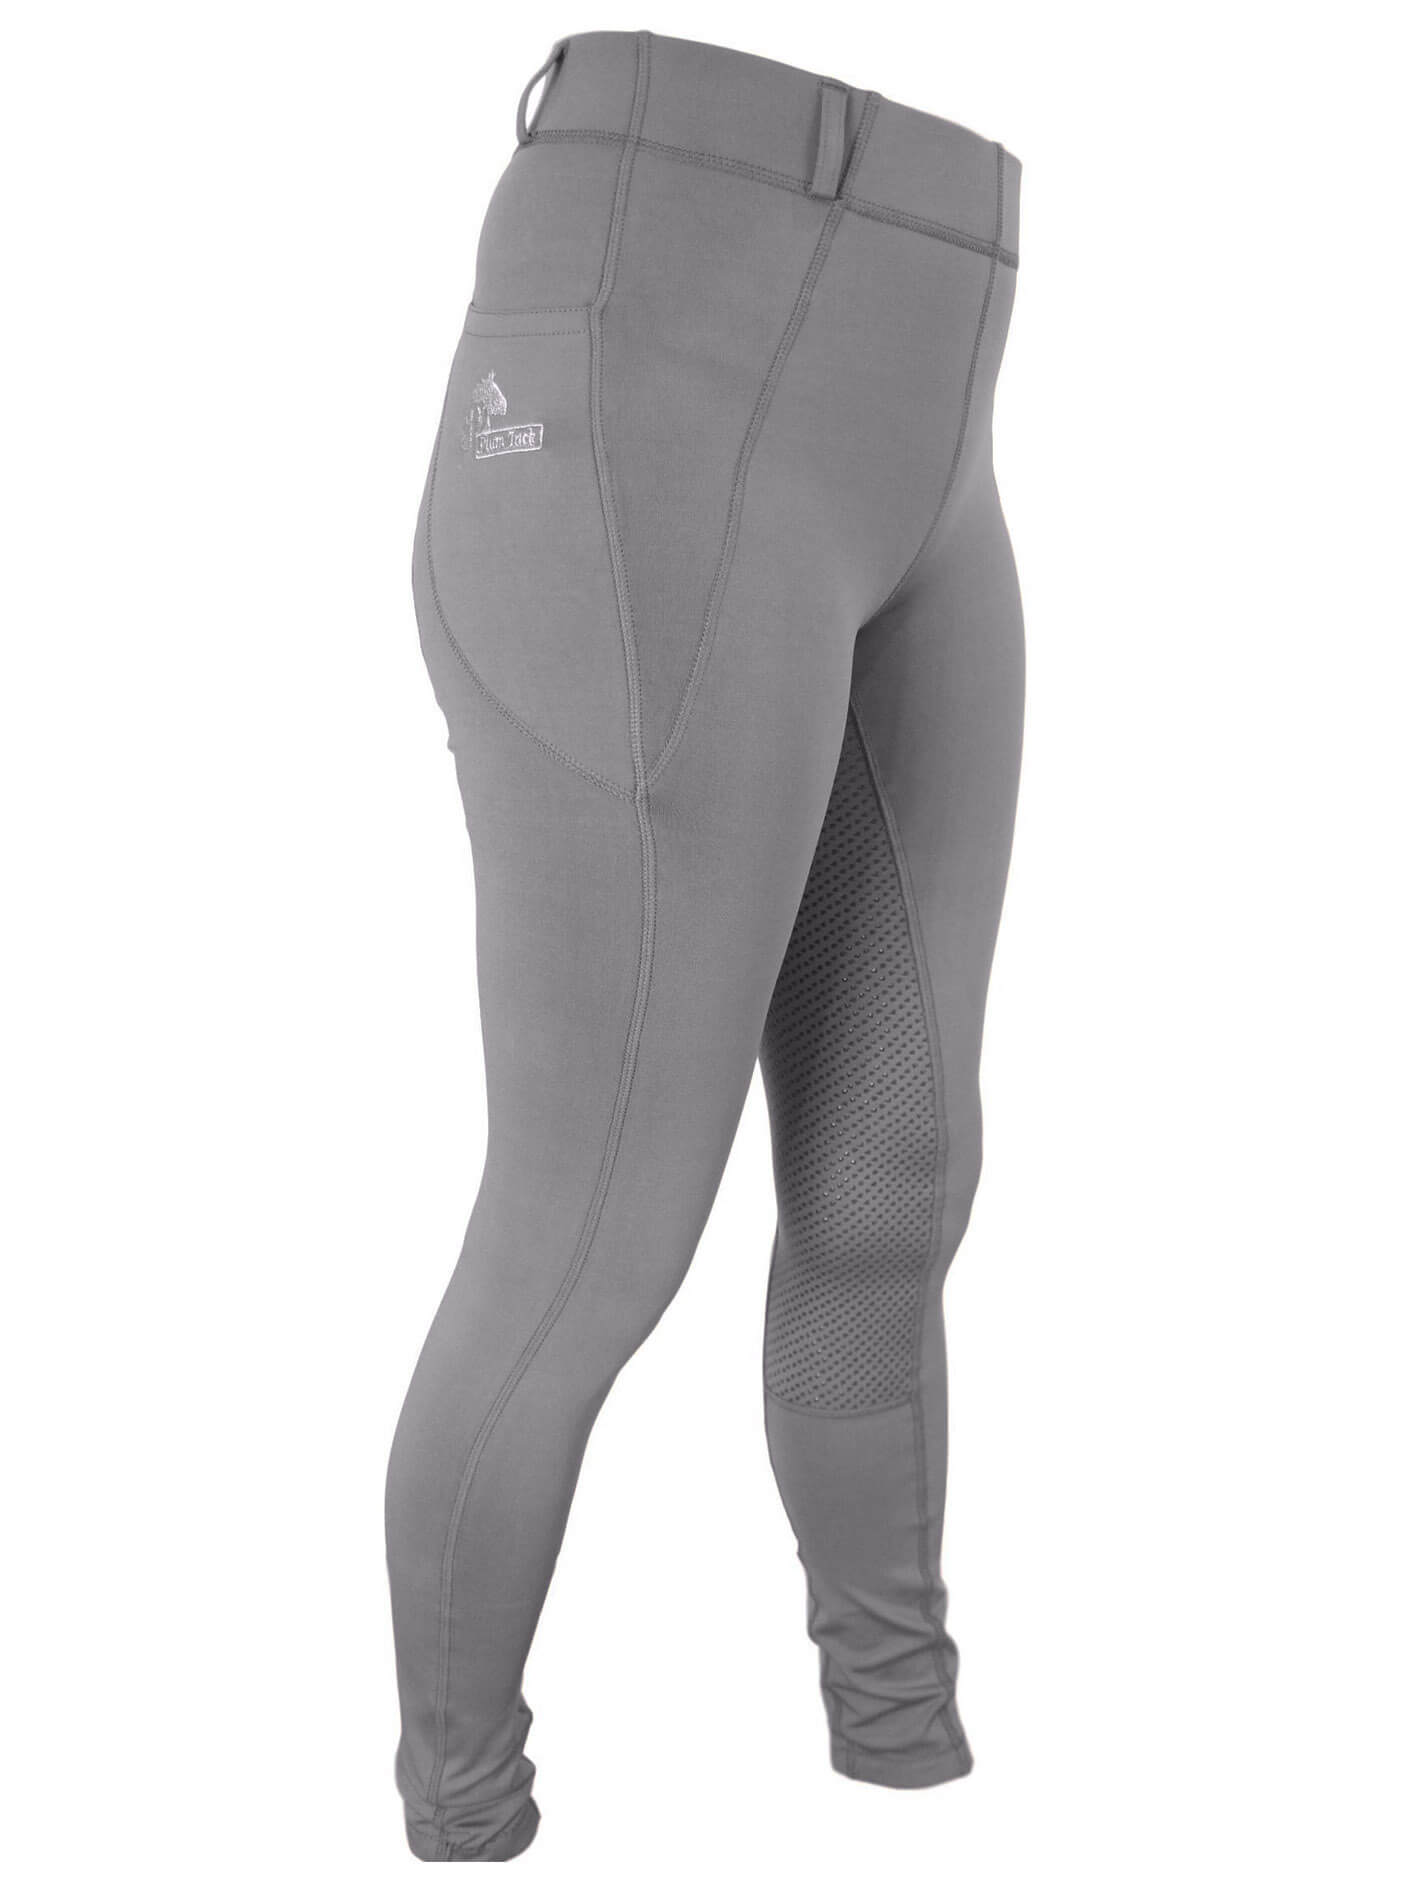 Dark Grey Riding Tights® / Leggings® With Full Seat and Deep Phone Pocket -  LuxeEquine